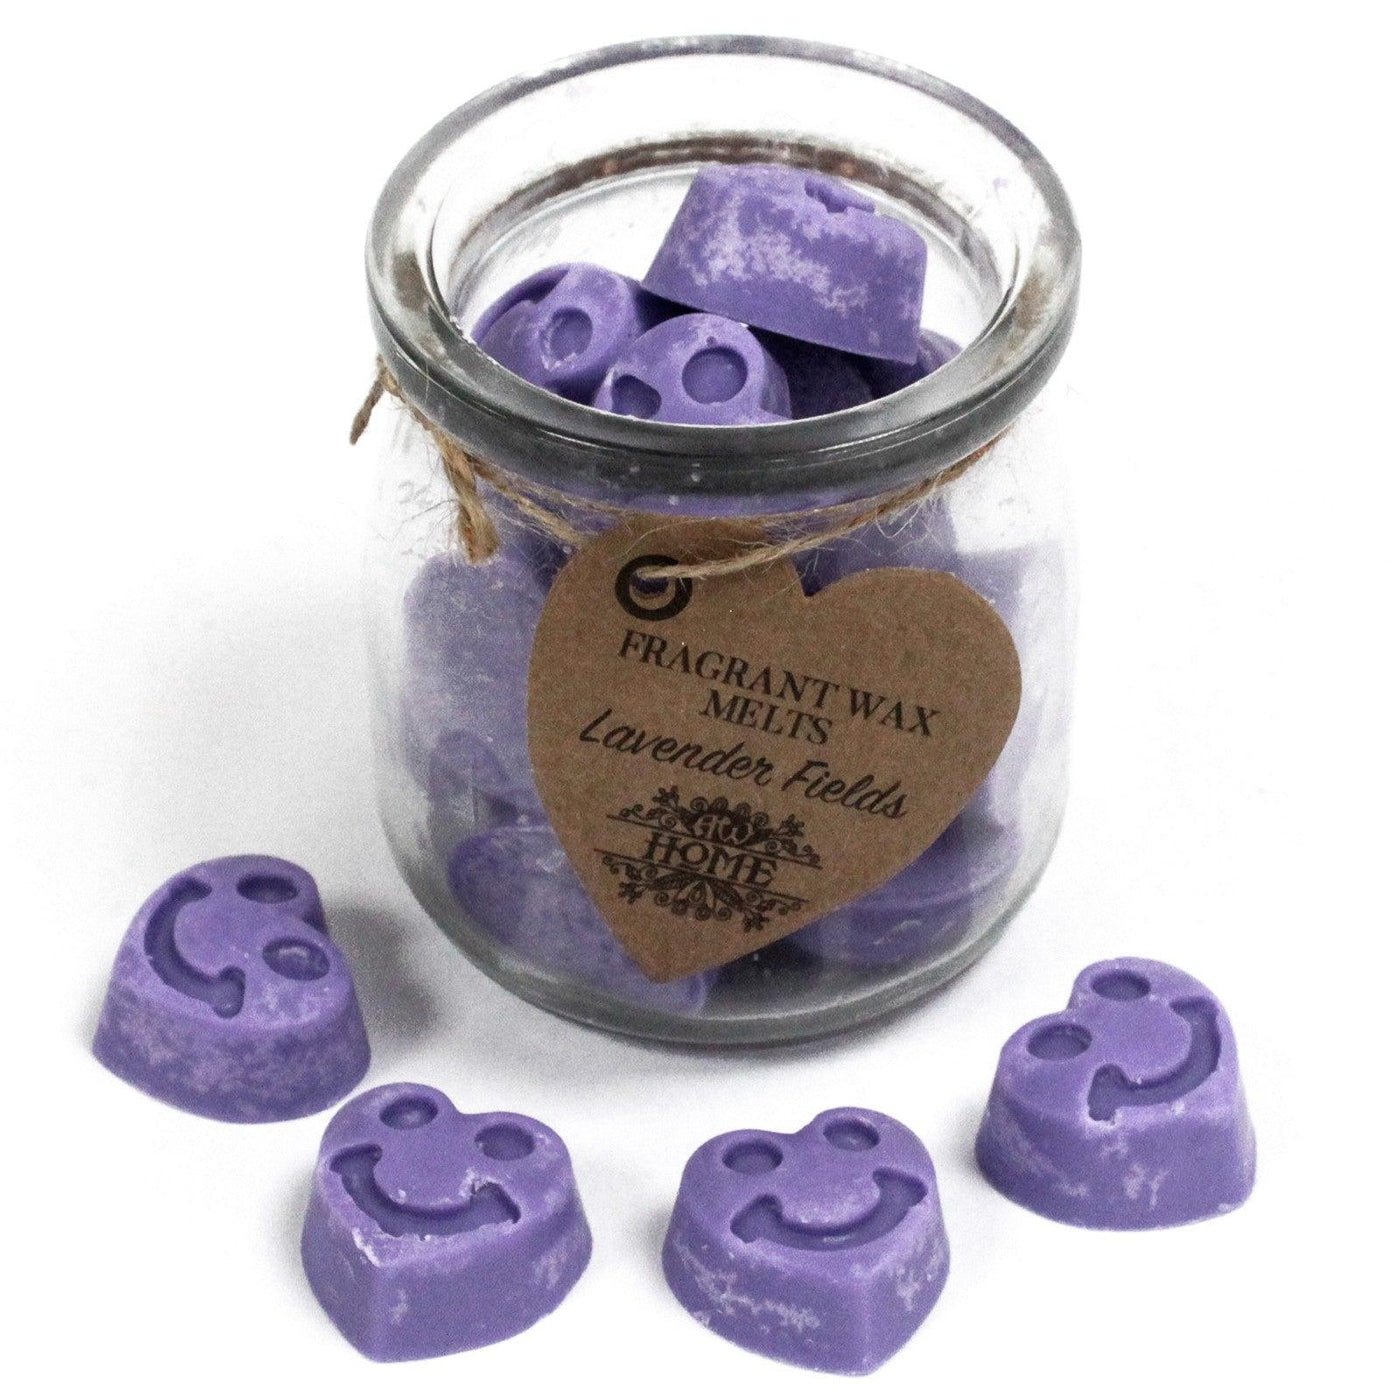 Natural Soy Fragrance Oil Heart Wax Melts - Lavender Fields.